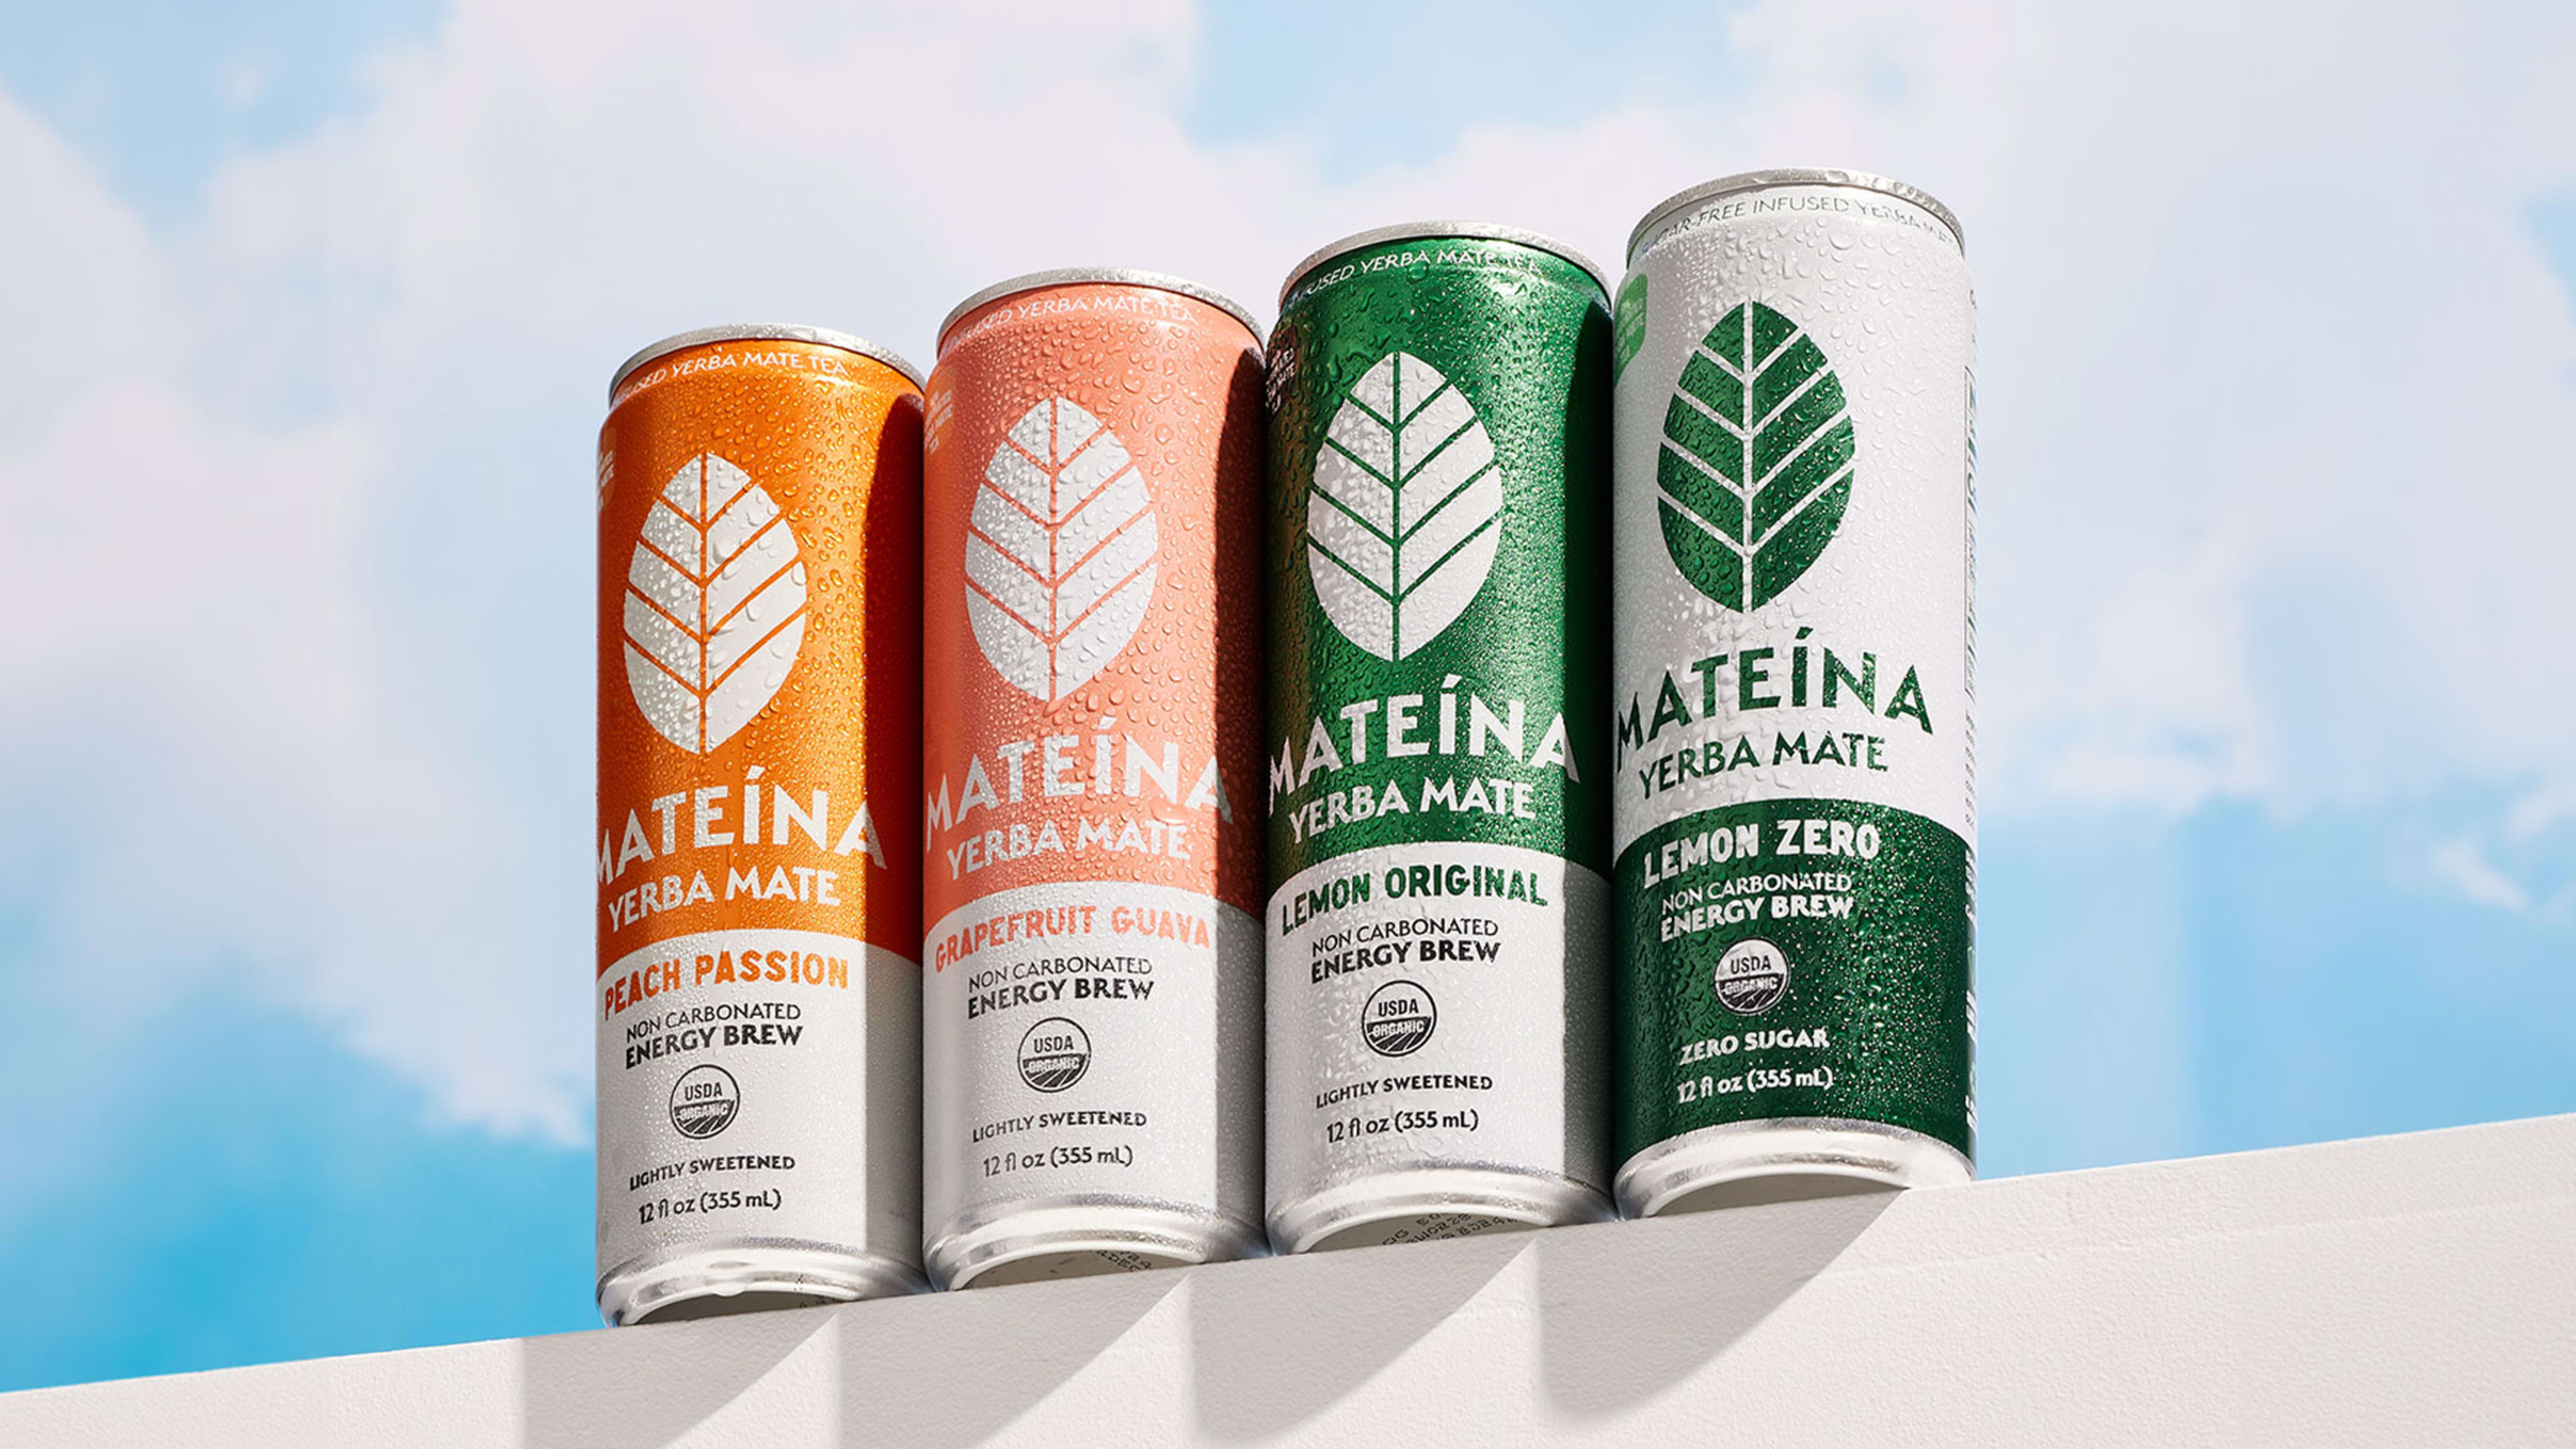 Mateína is bringing its yerba mate beverages to America with help from a neurobiologist influencer